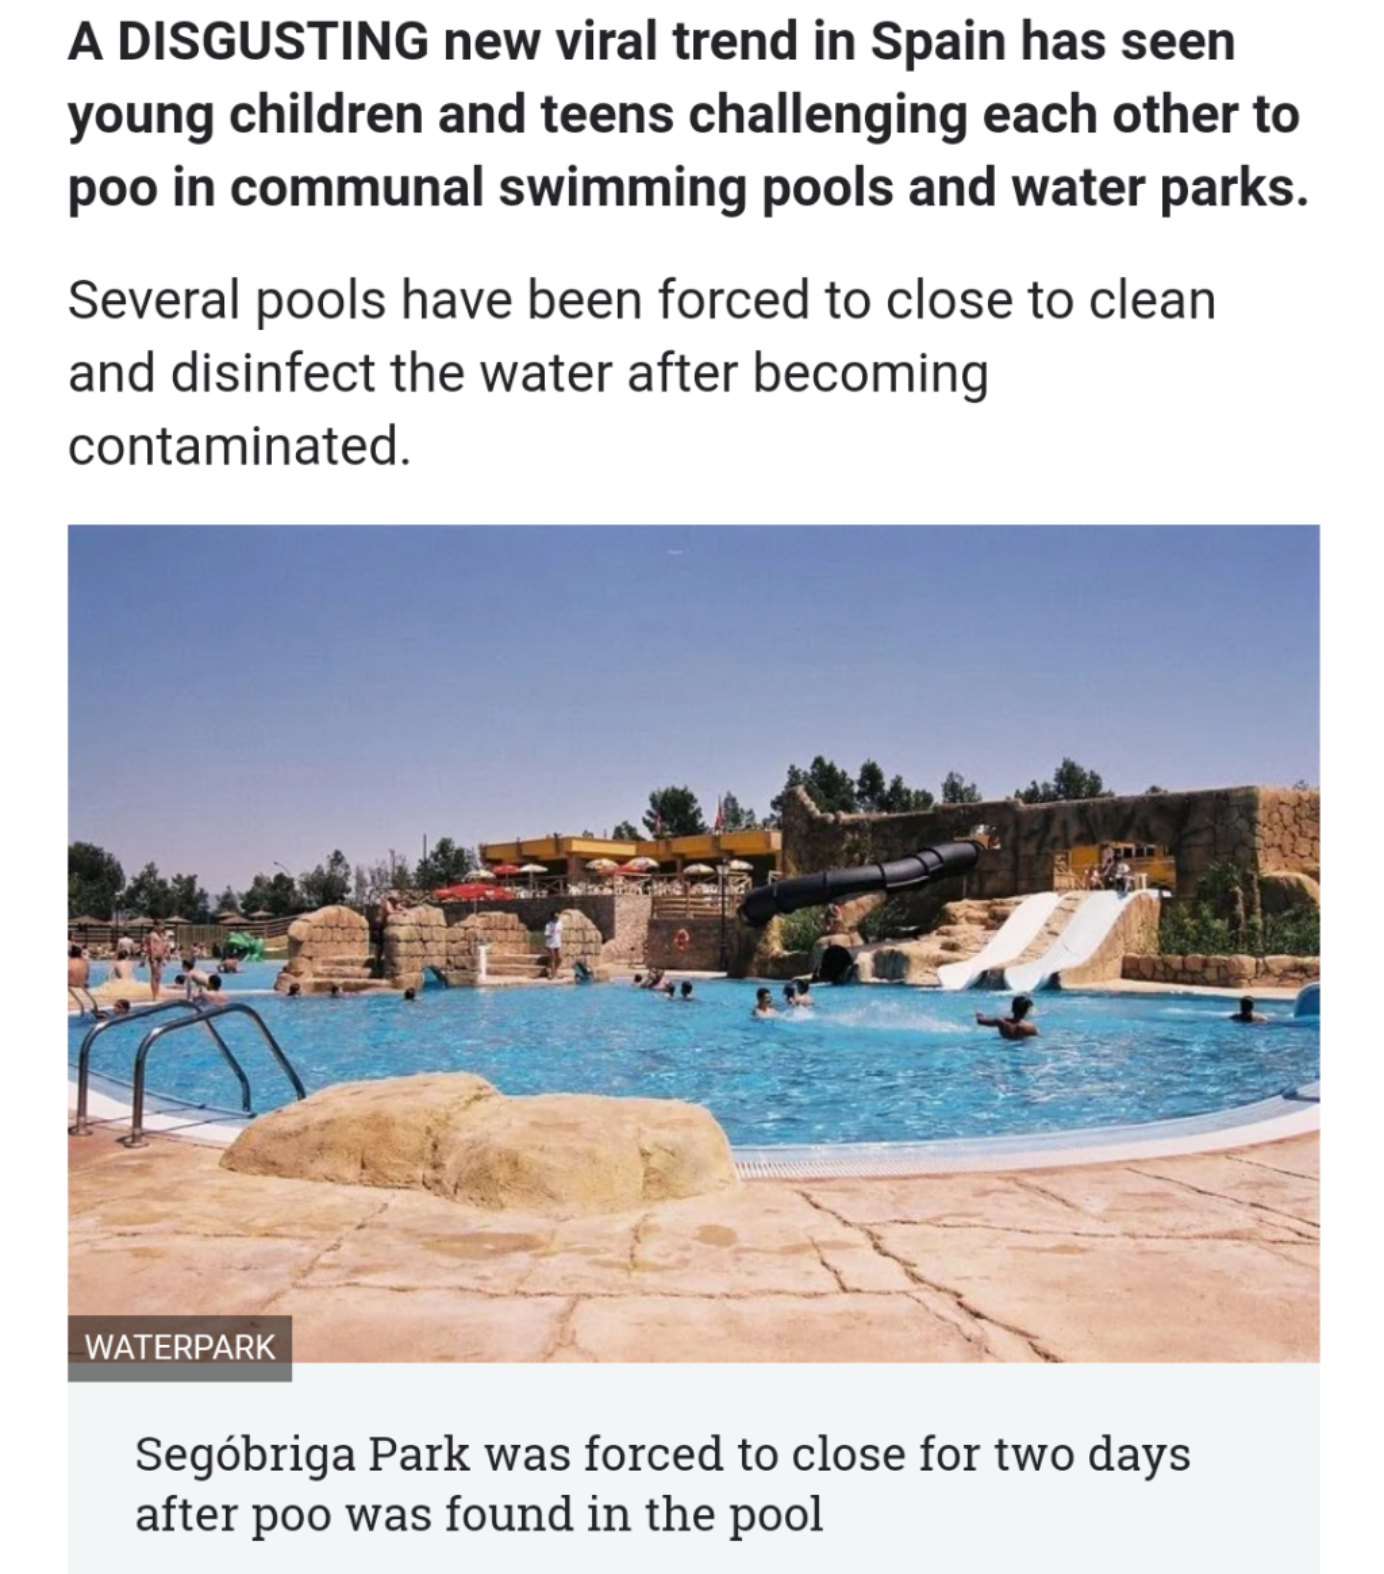 A Disgusting new viral trend in Spain has seen young children and teens challenging each other to poo in communal swimming pools and water parks. Several pools have been forced to close to clean and disinfect the water after becoming contaminated.…